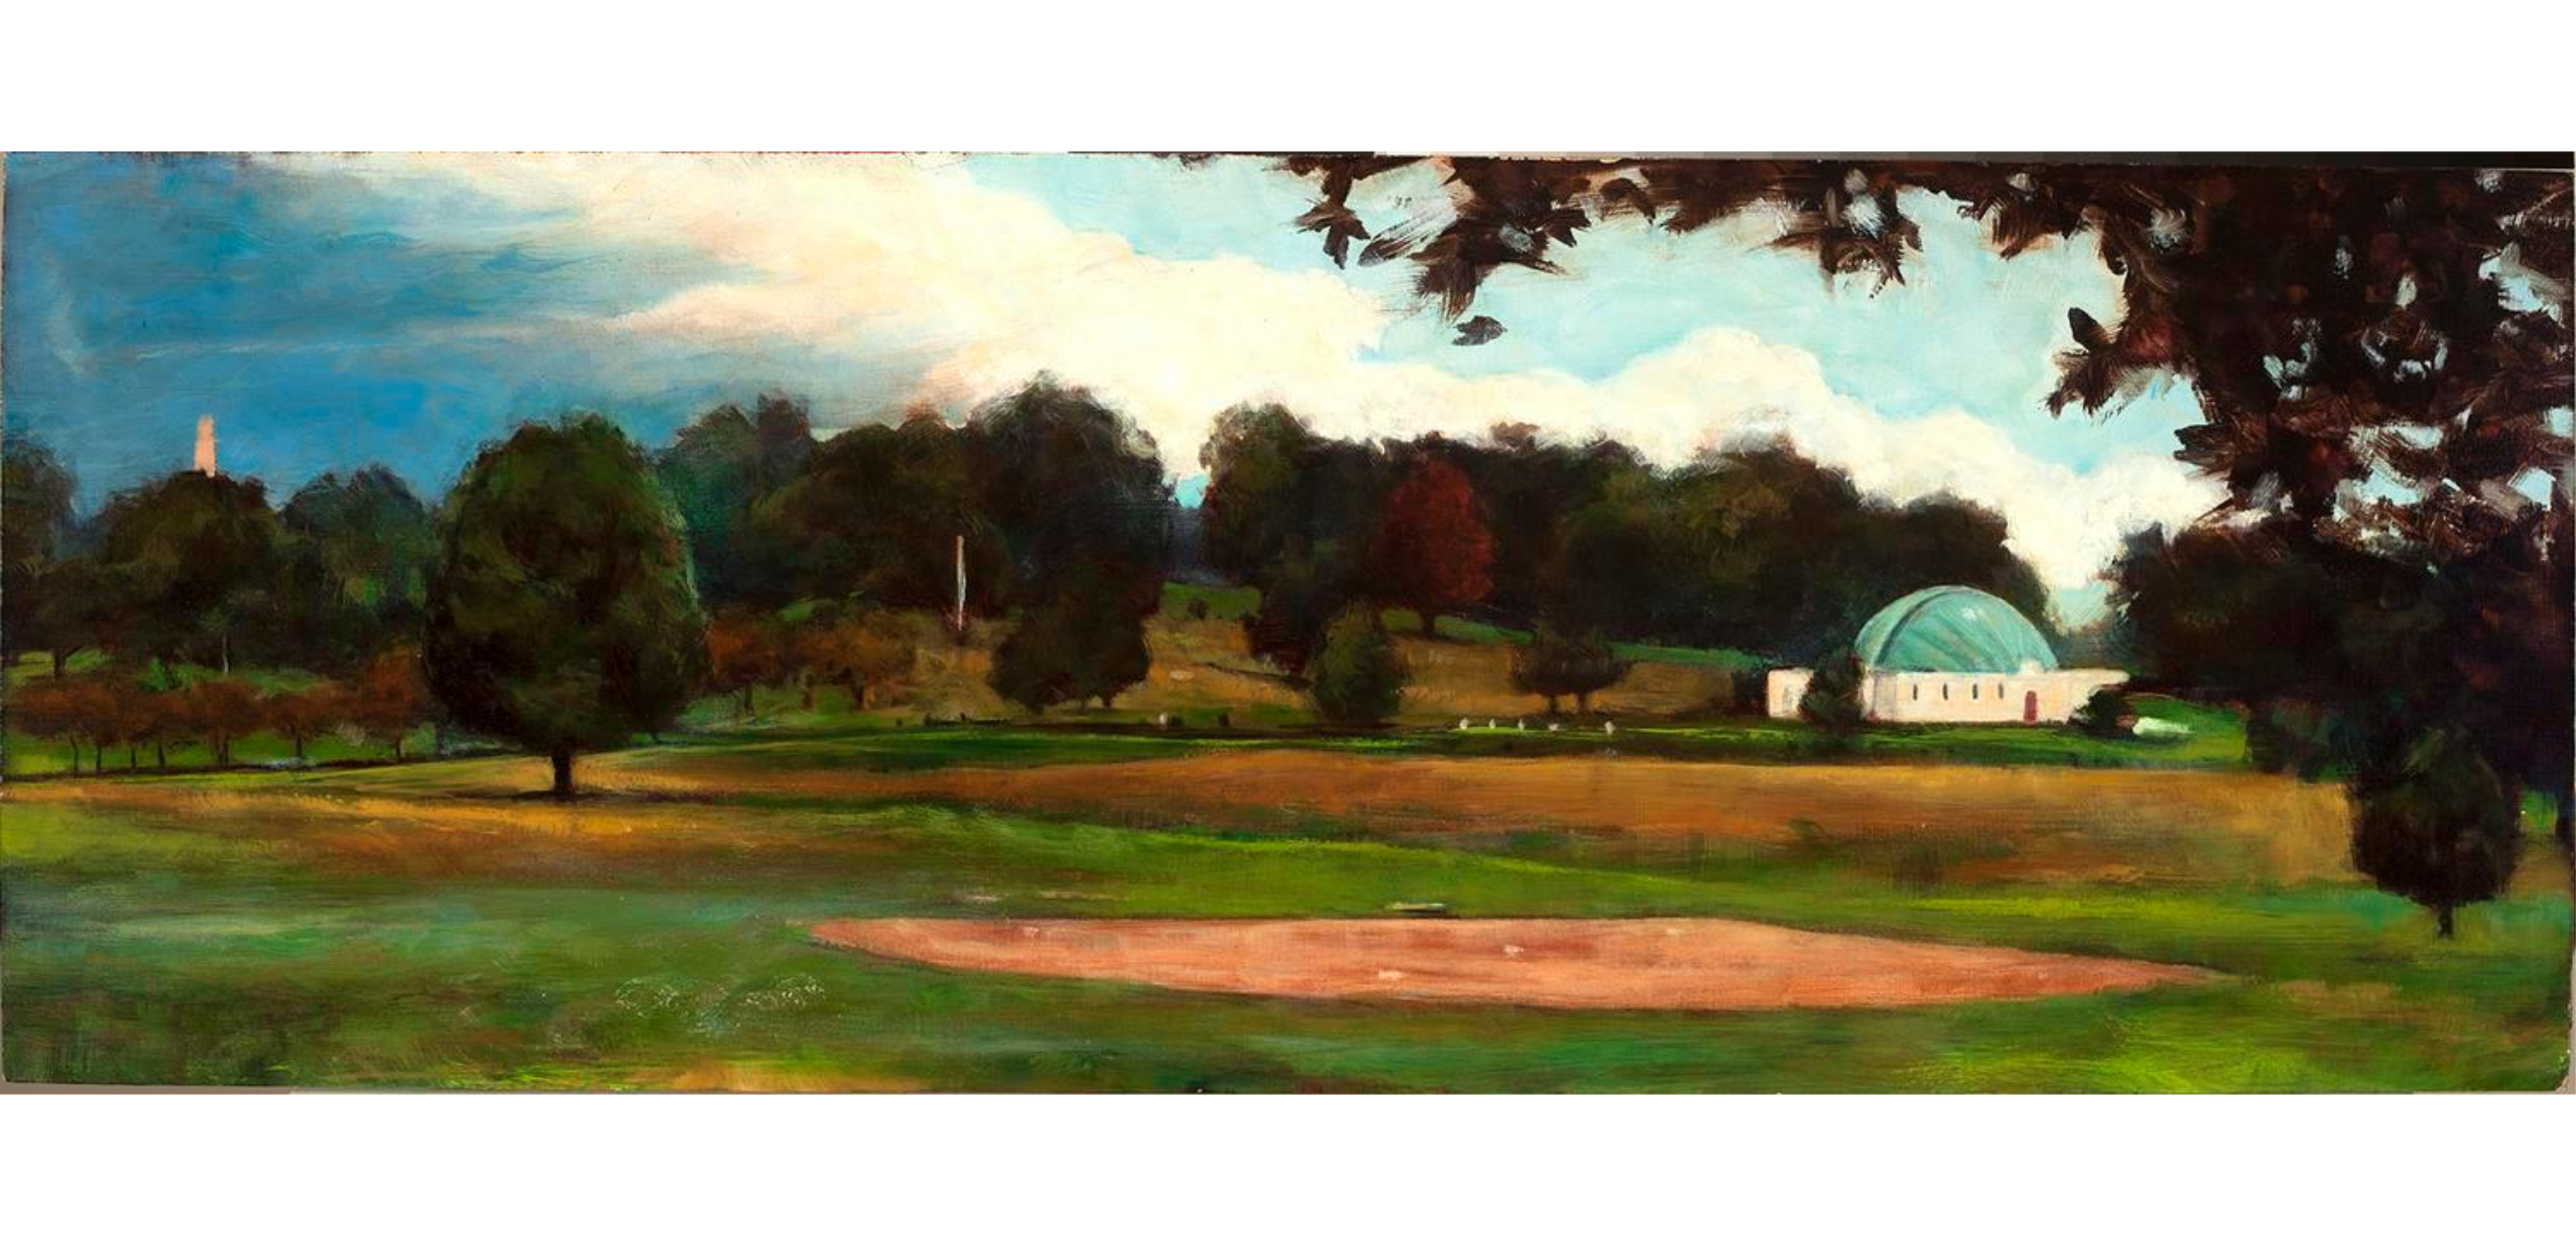 Kyle Andrew Phillips, "Walnut Hill Park," 2008, Oil on wood, 10 x 26 1/2 in., Gift of the artist, 2008.61